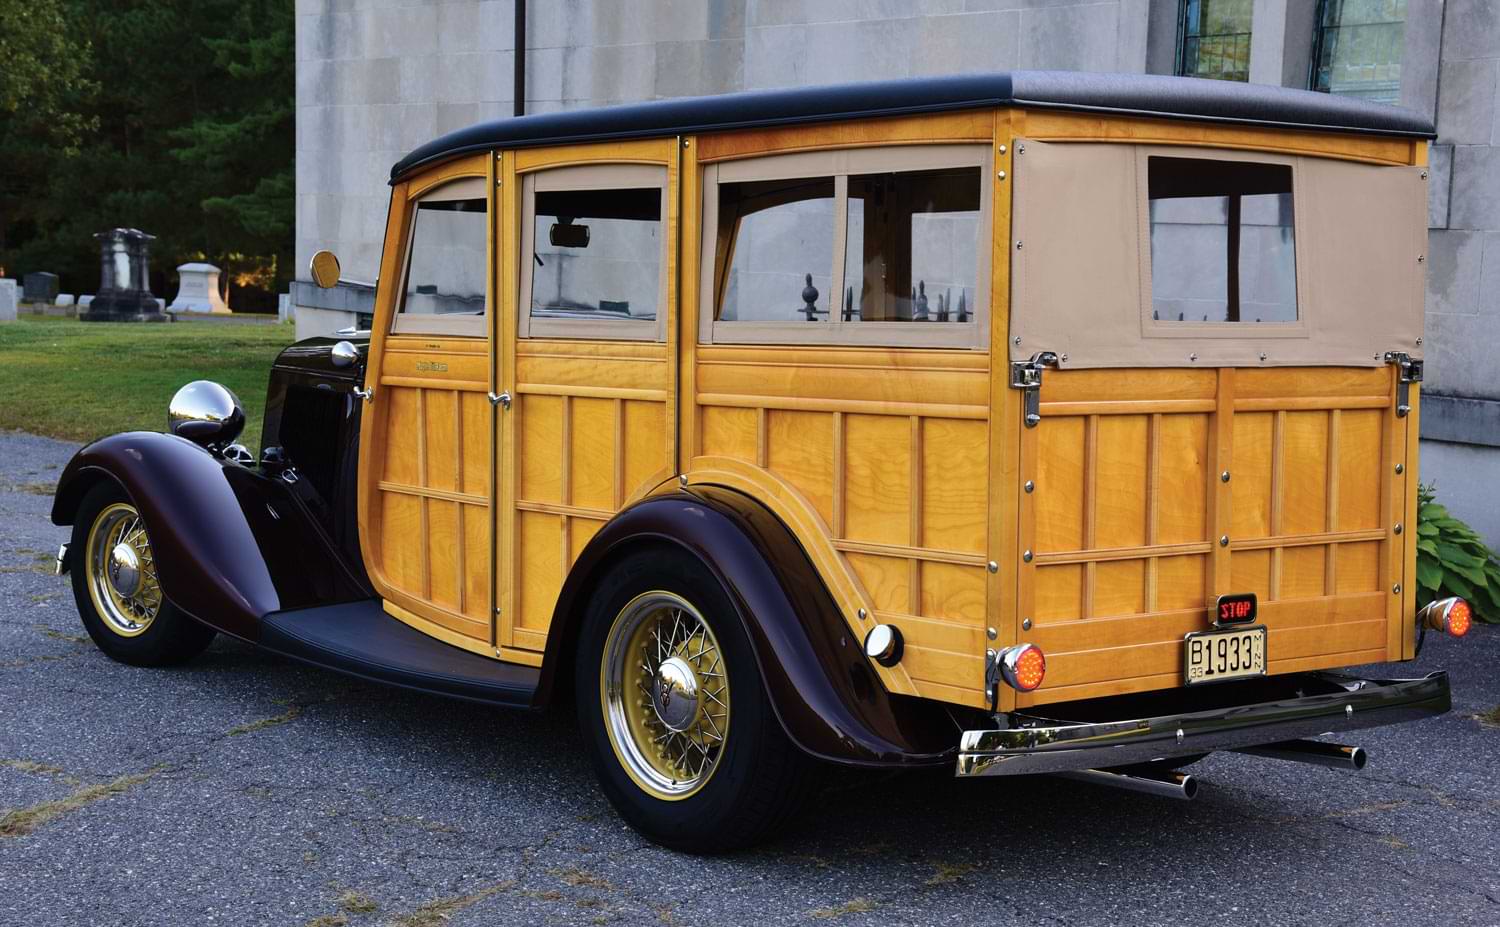 1933 Ford Station Wagon back view